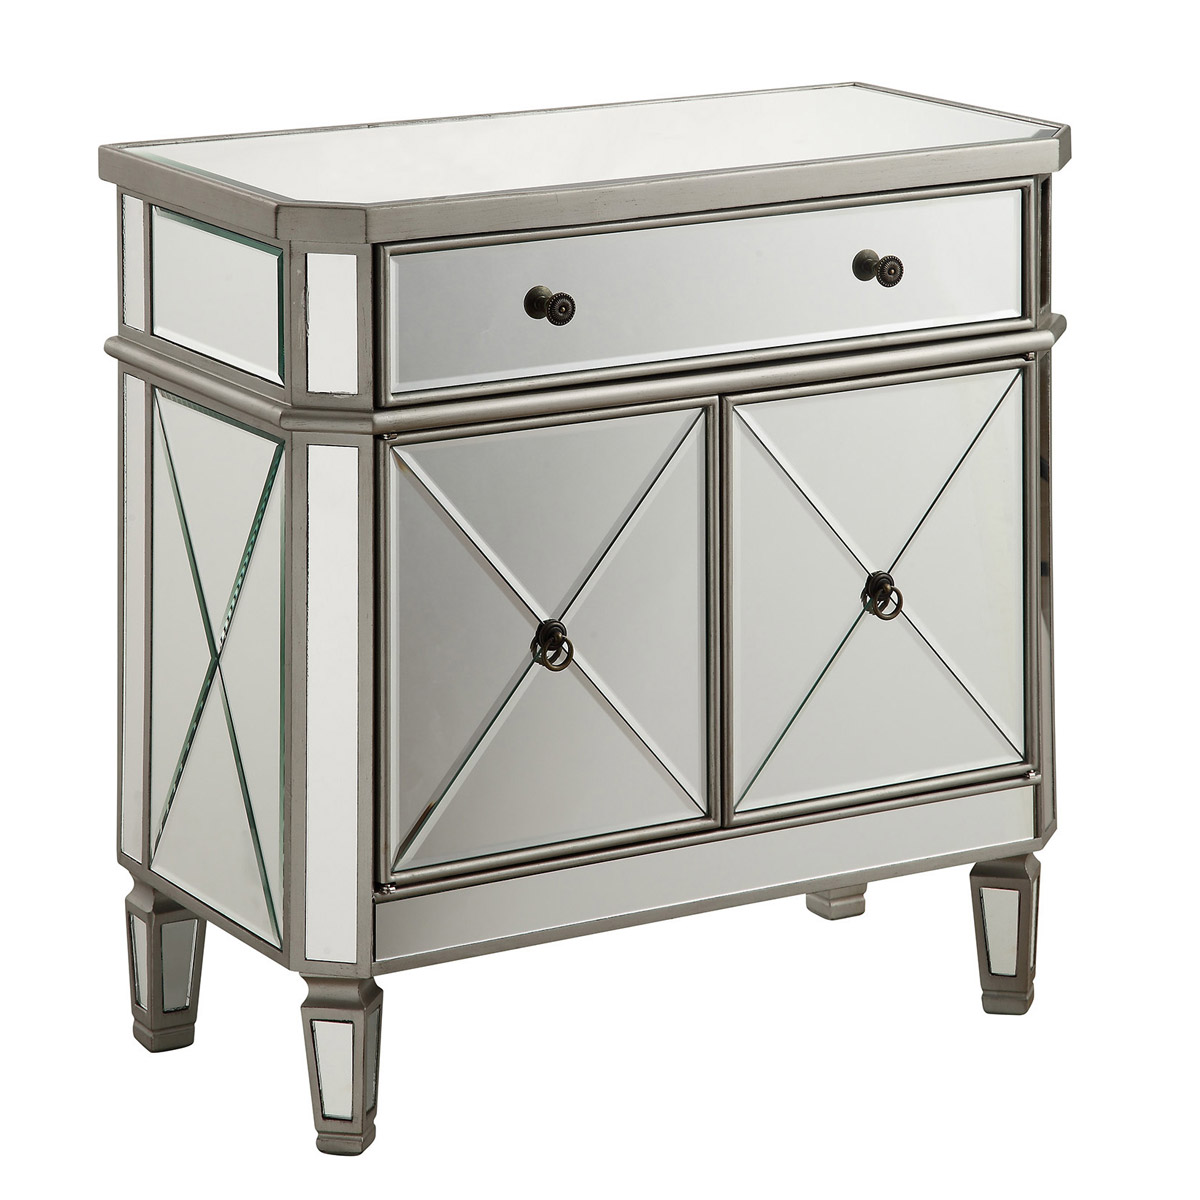 Mf6-1002sc 1 Drawer 2 Door Cabinet Silver Clear, Hand Rubbed Antique Silver - 32 X 16 X 32 In.